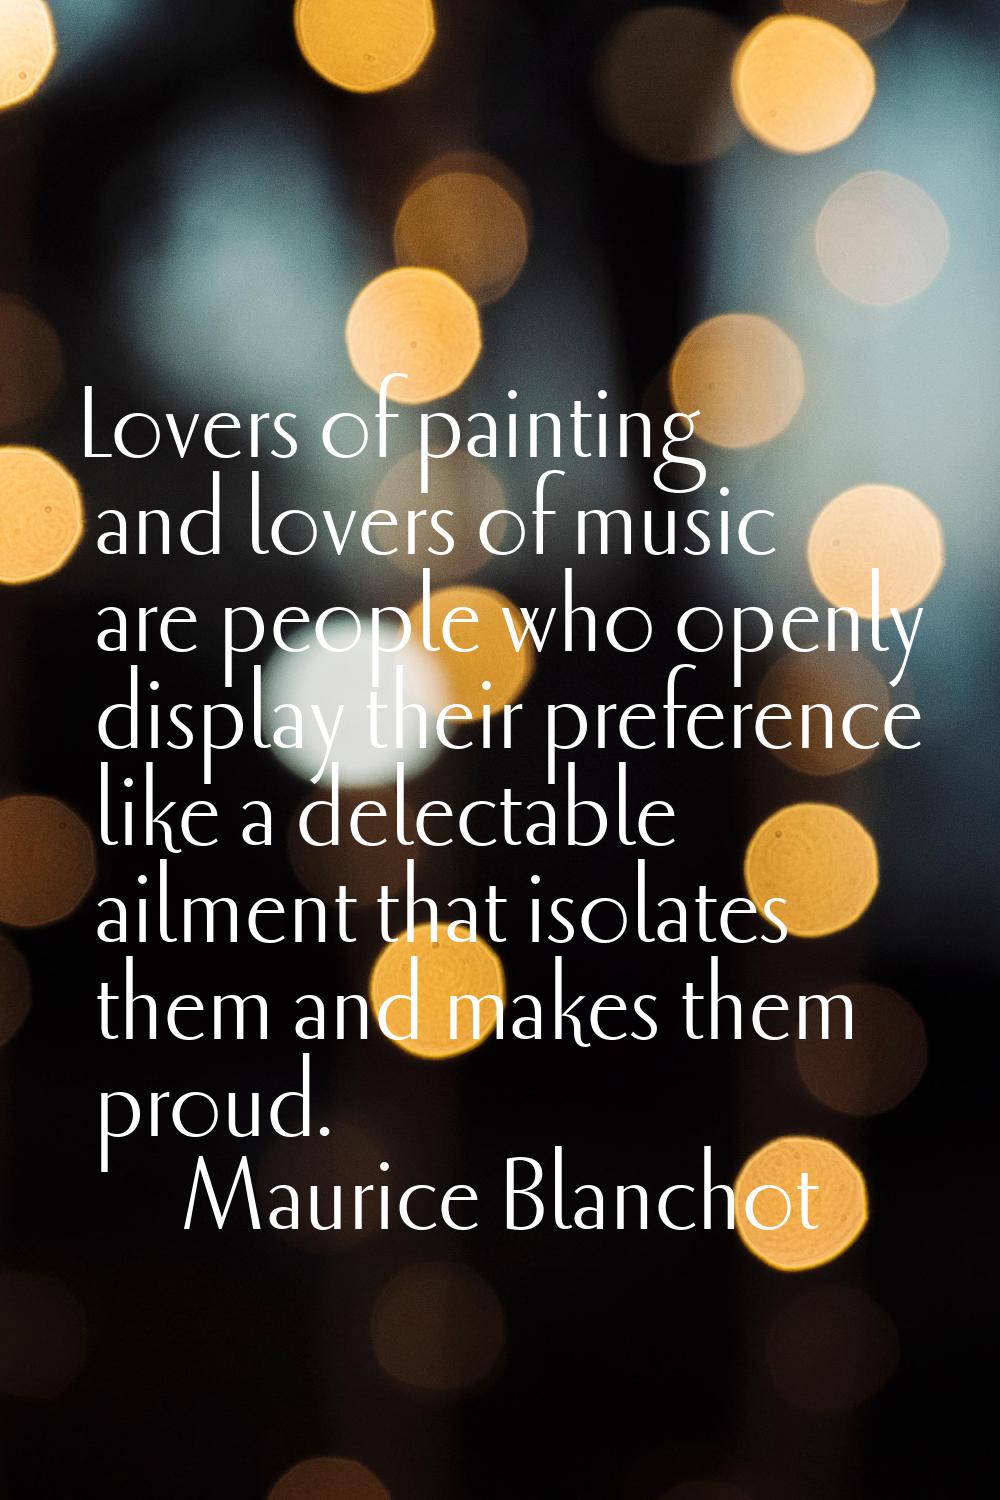 Lovers of painting and lovers of music are people who openly display their preference like a delect